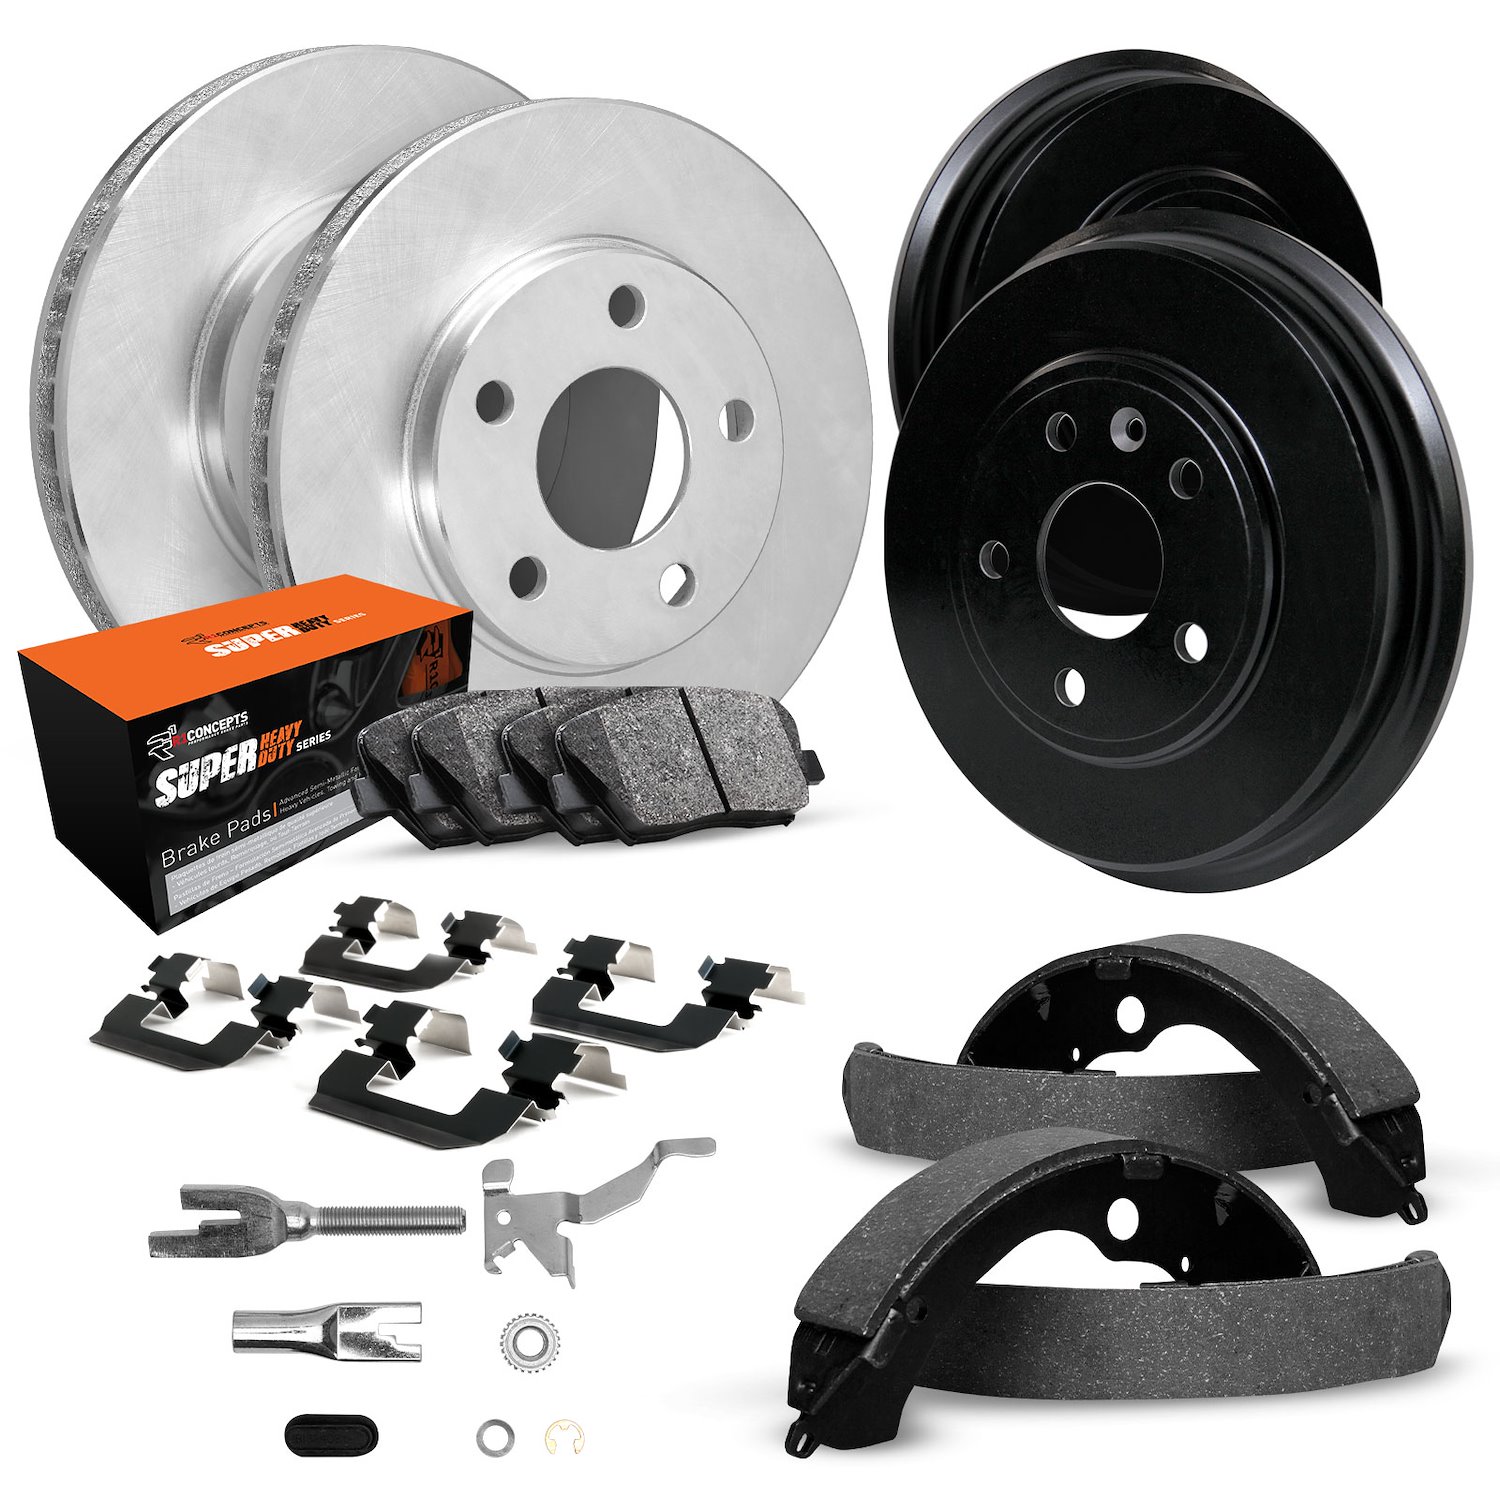 E-Line Blank Brake Rotor & Drum Set w/Super-Duty Pads, Shoes, Hardware, & Adjusters, 1994-1995 GM, Position: Front & Rear